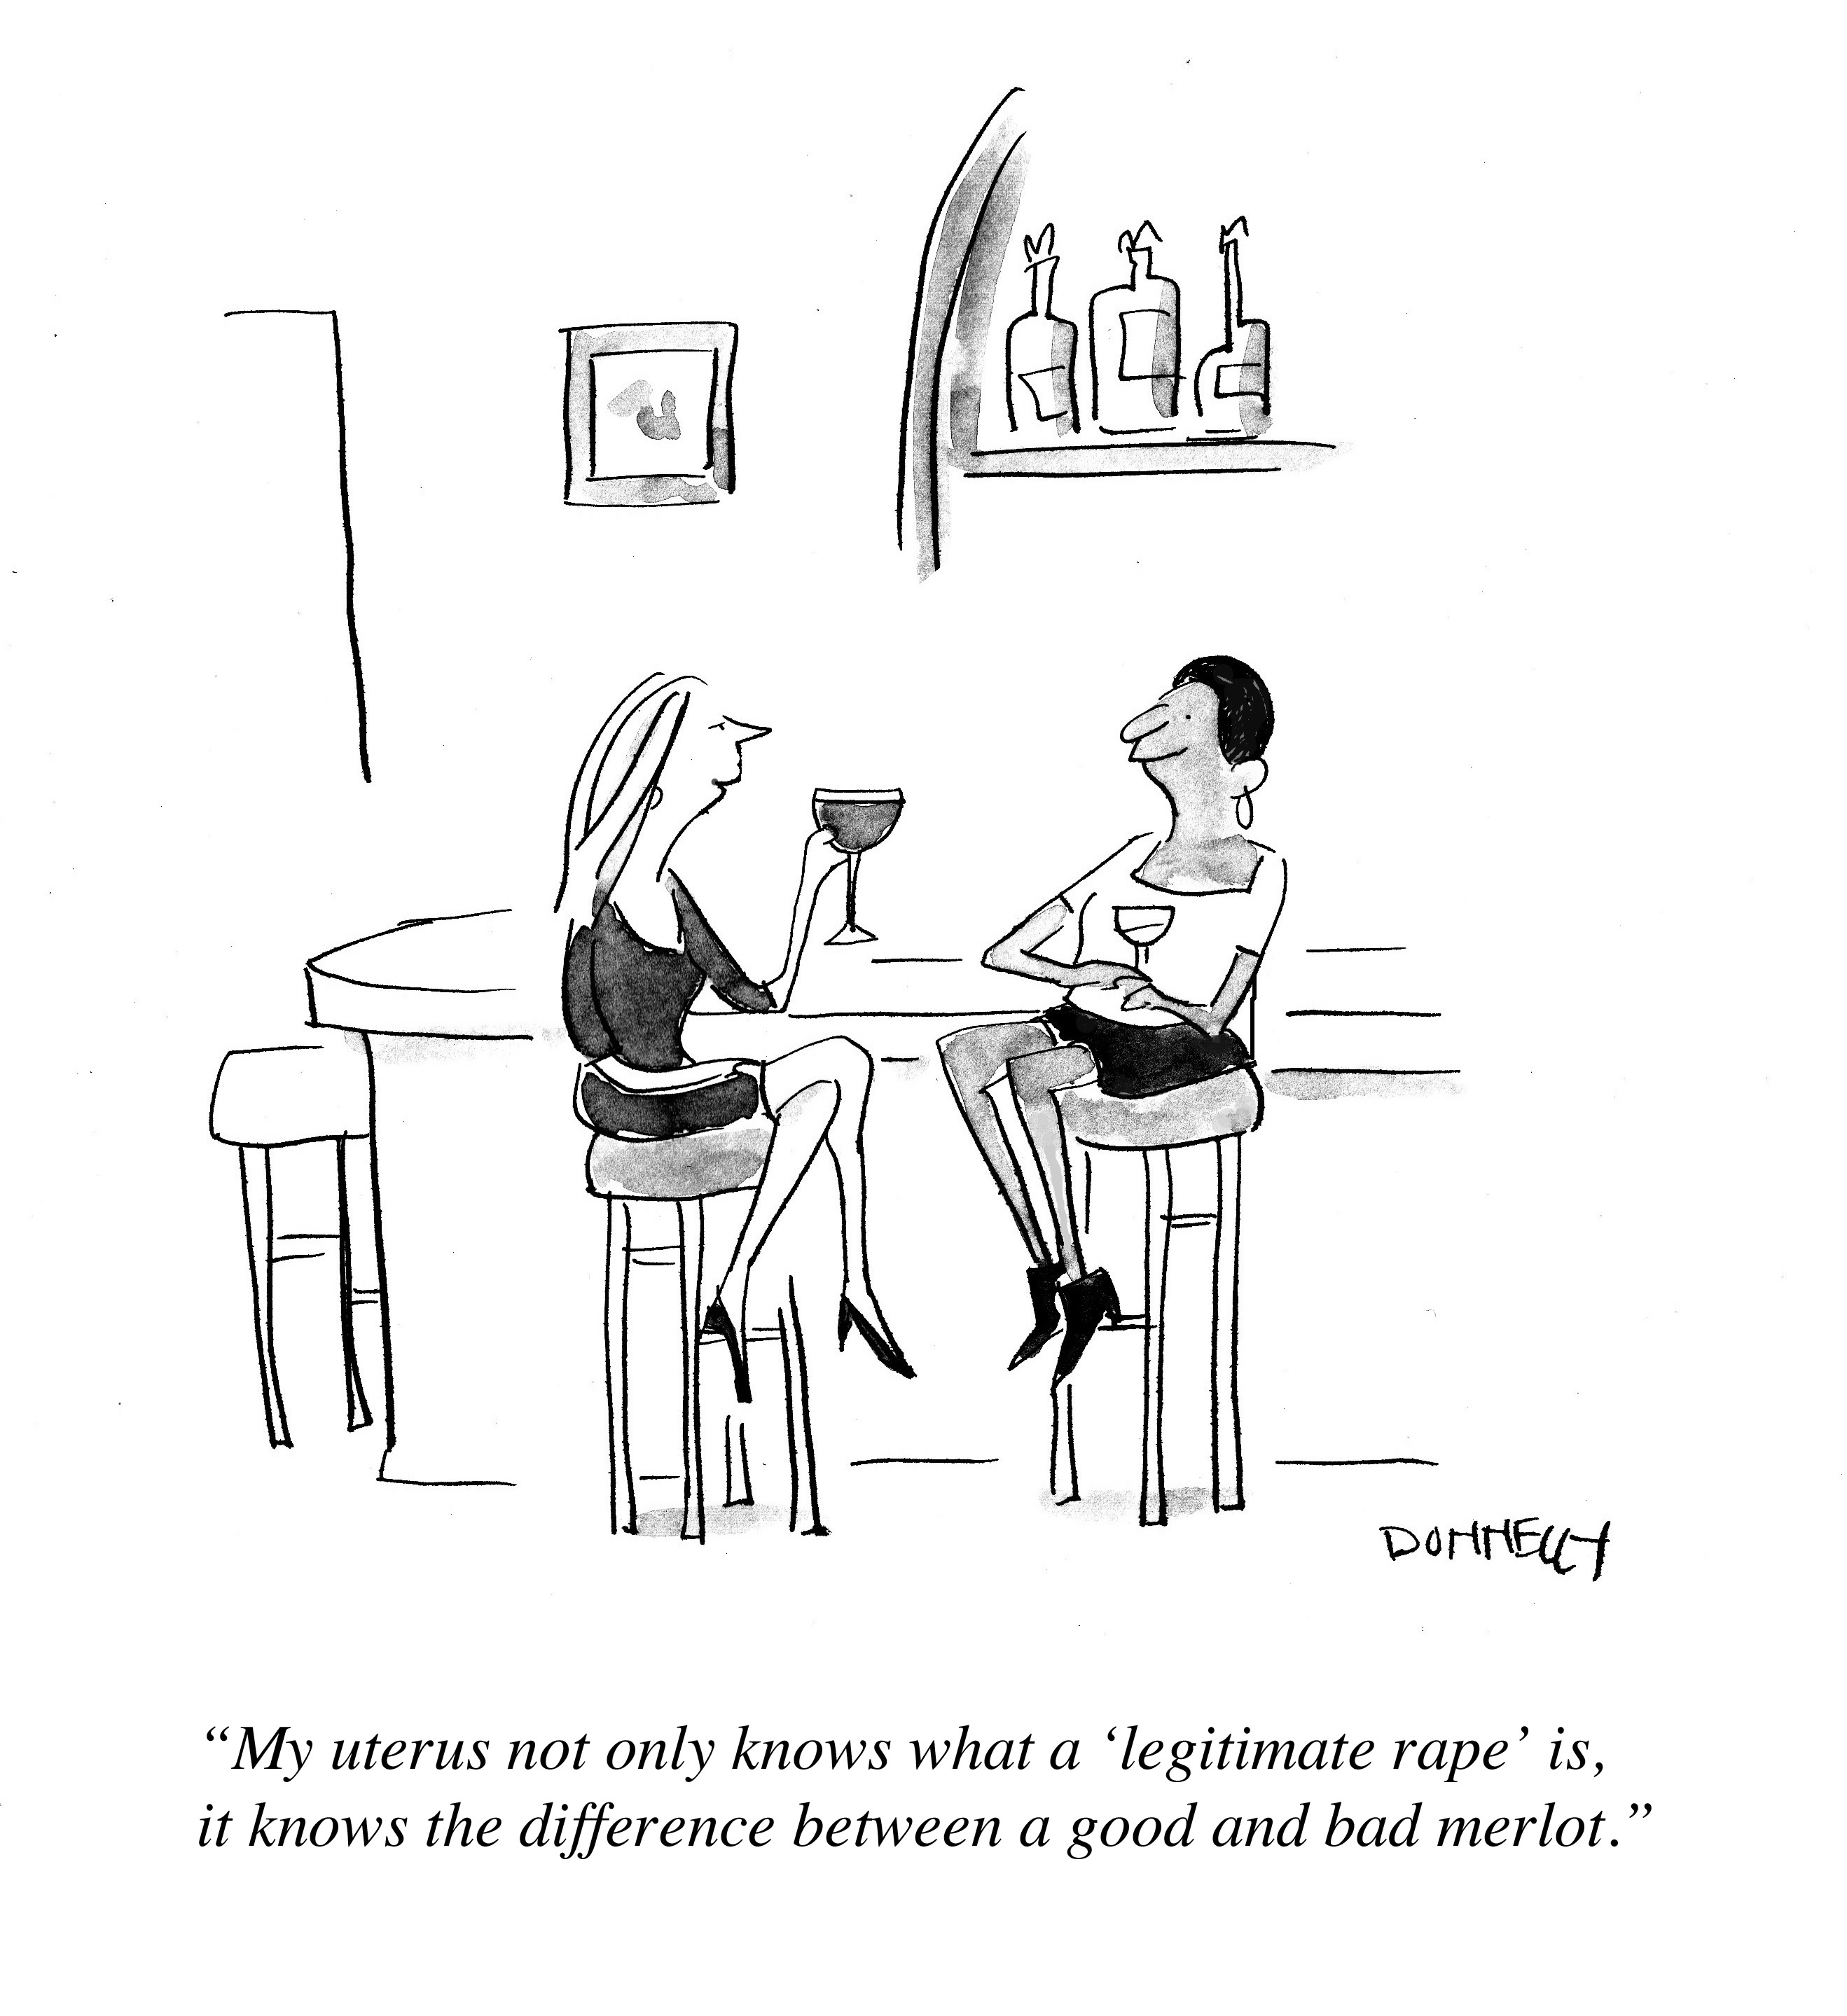 When Do They Serve The Wine? | About laughing at ourselves, and more. | Page 8